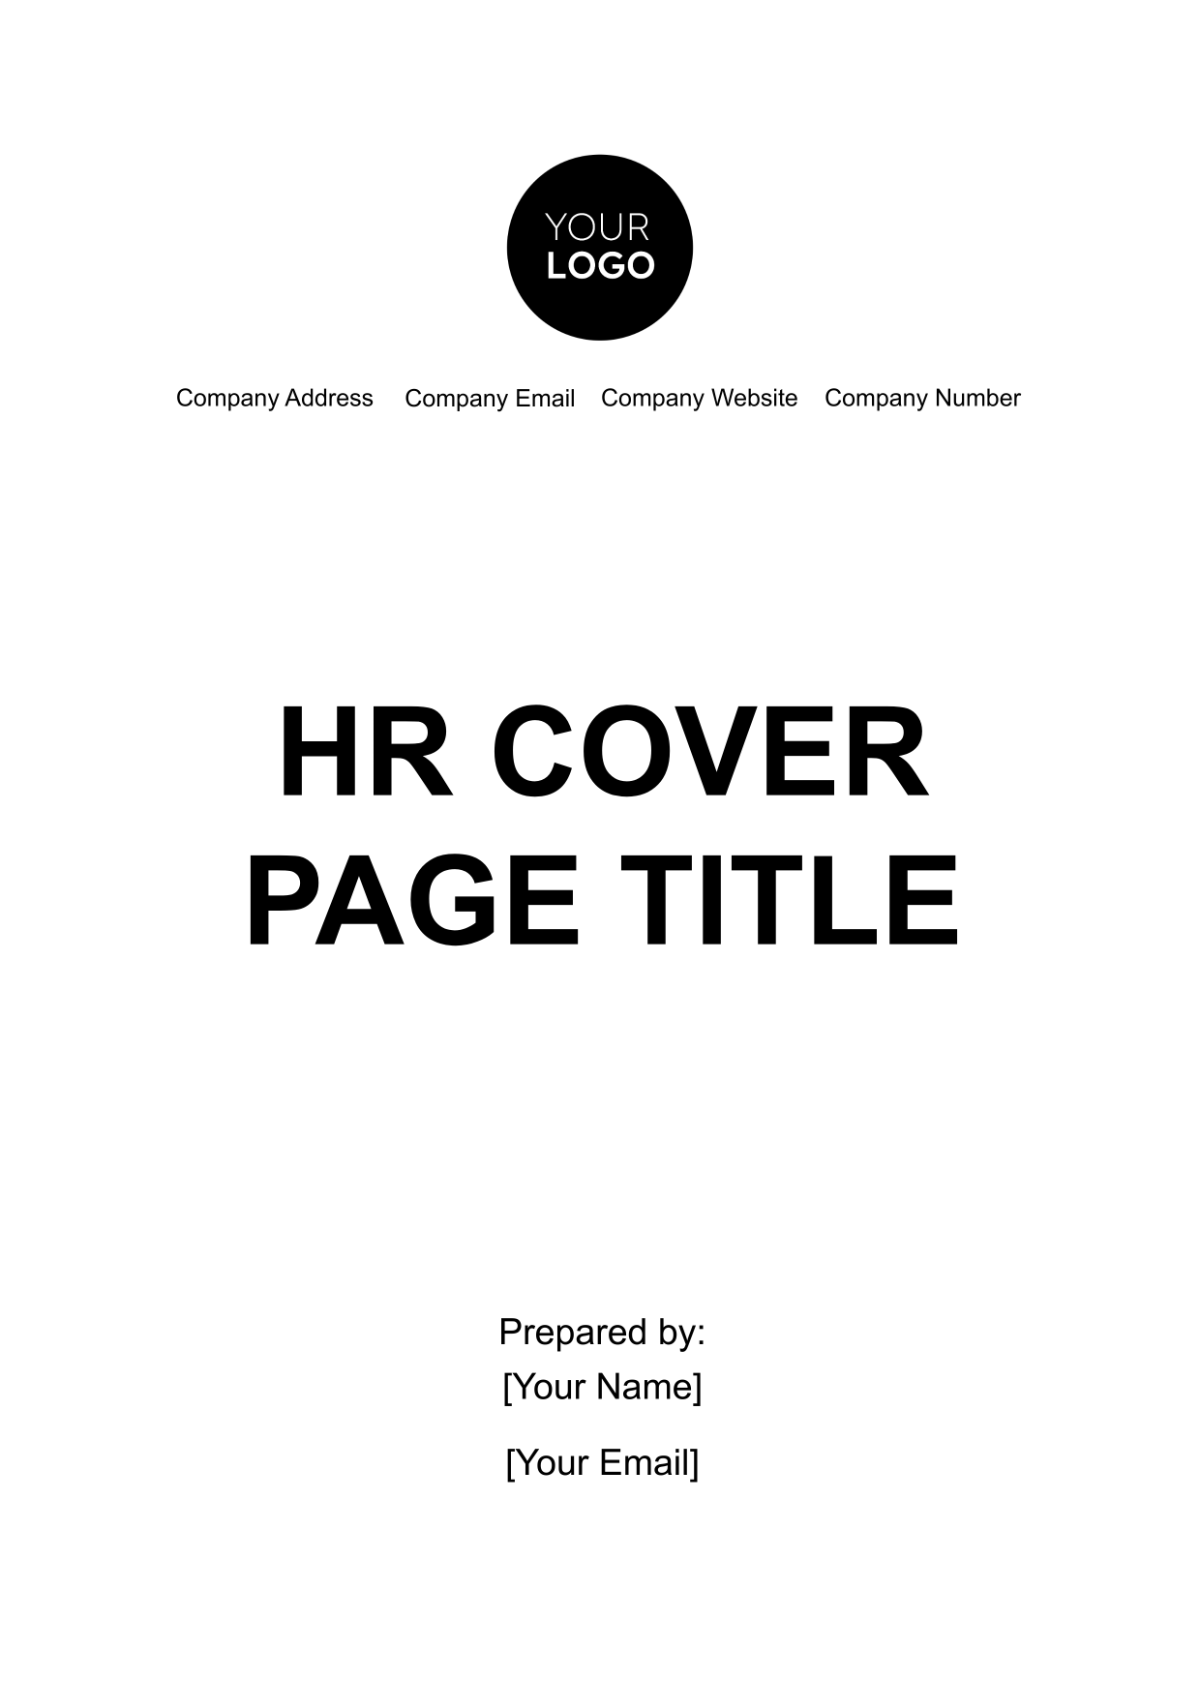 HR Cover Page